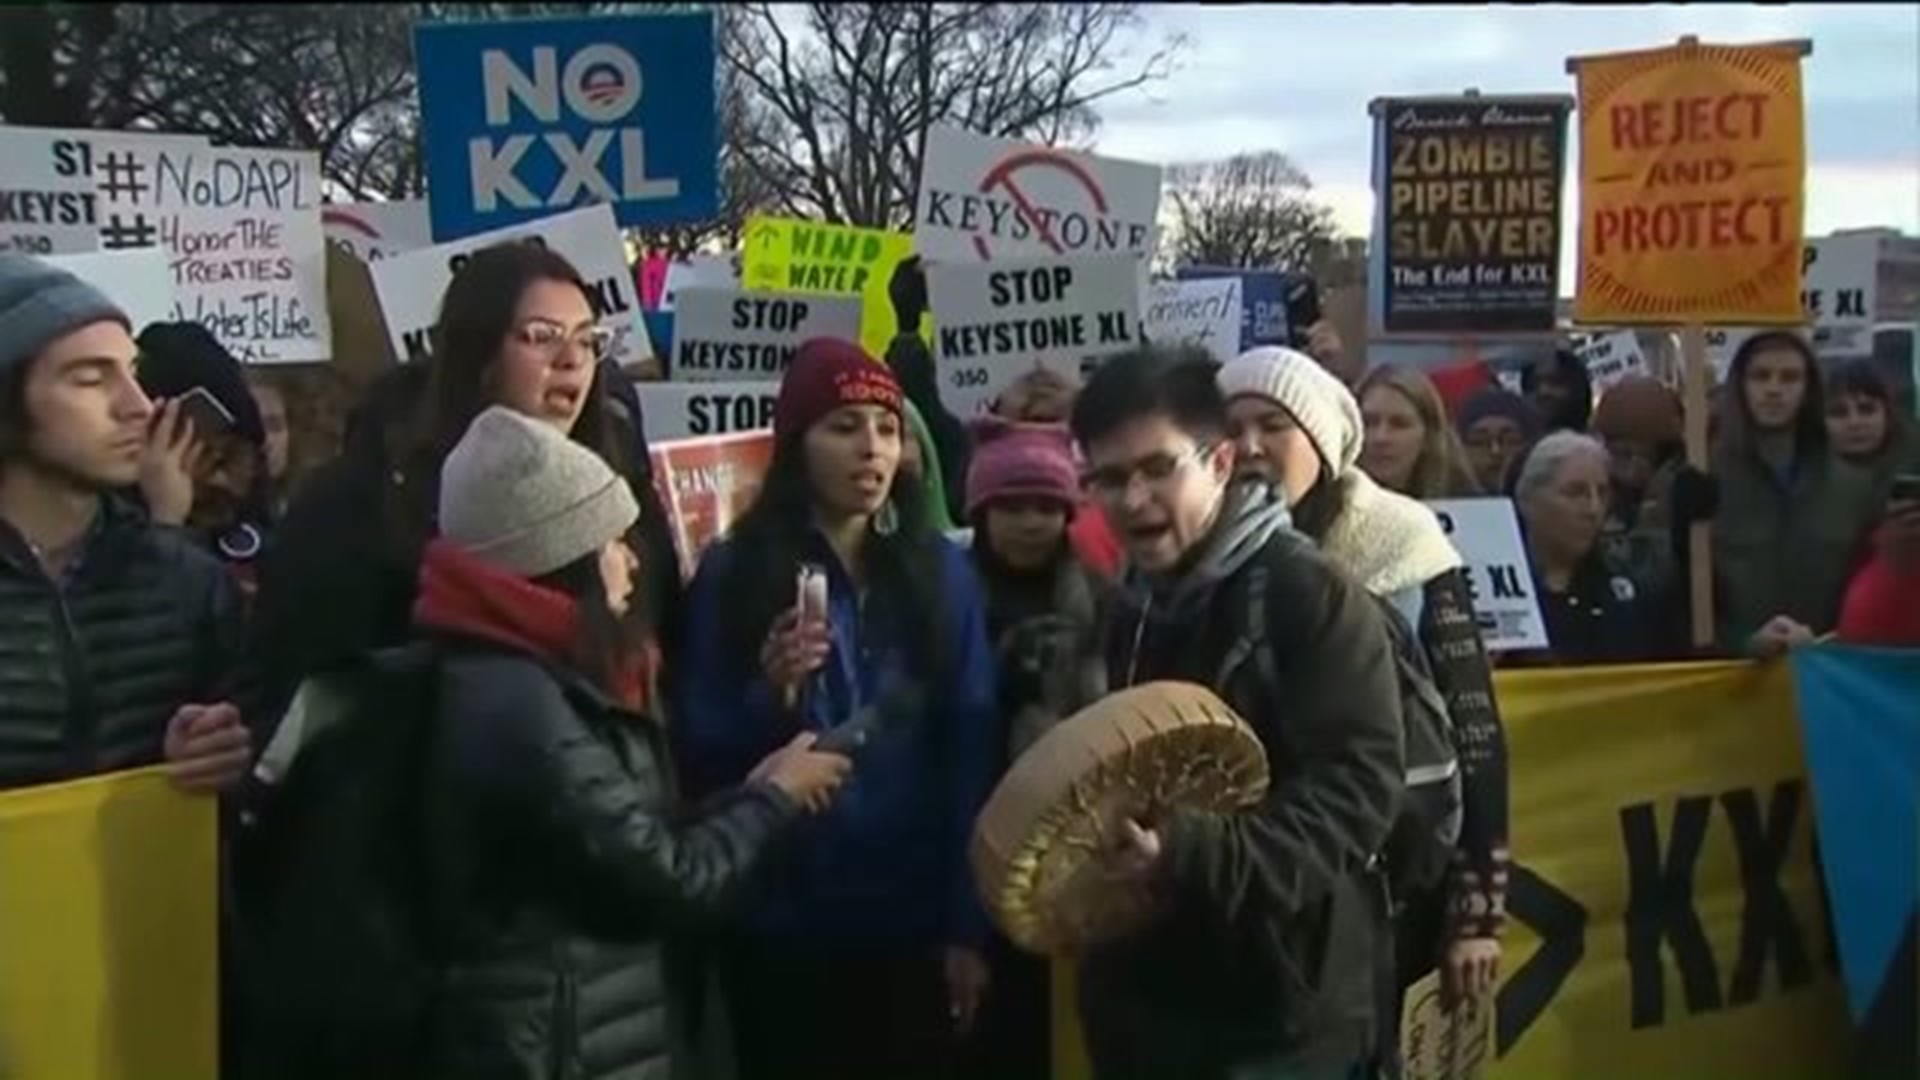 Dozens Gather To Rally Support Against Pipeline Projects